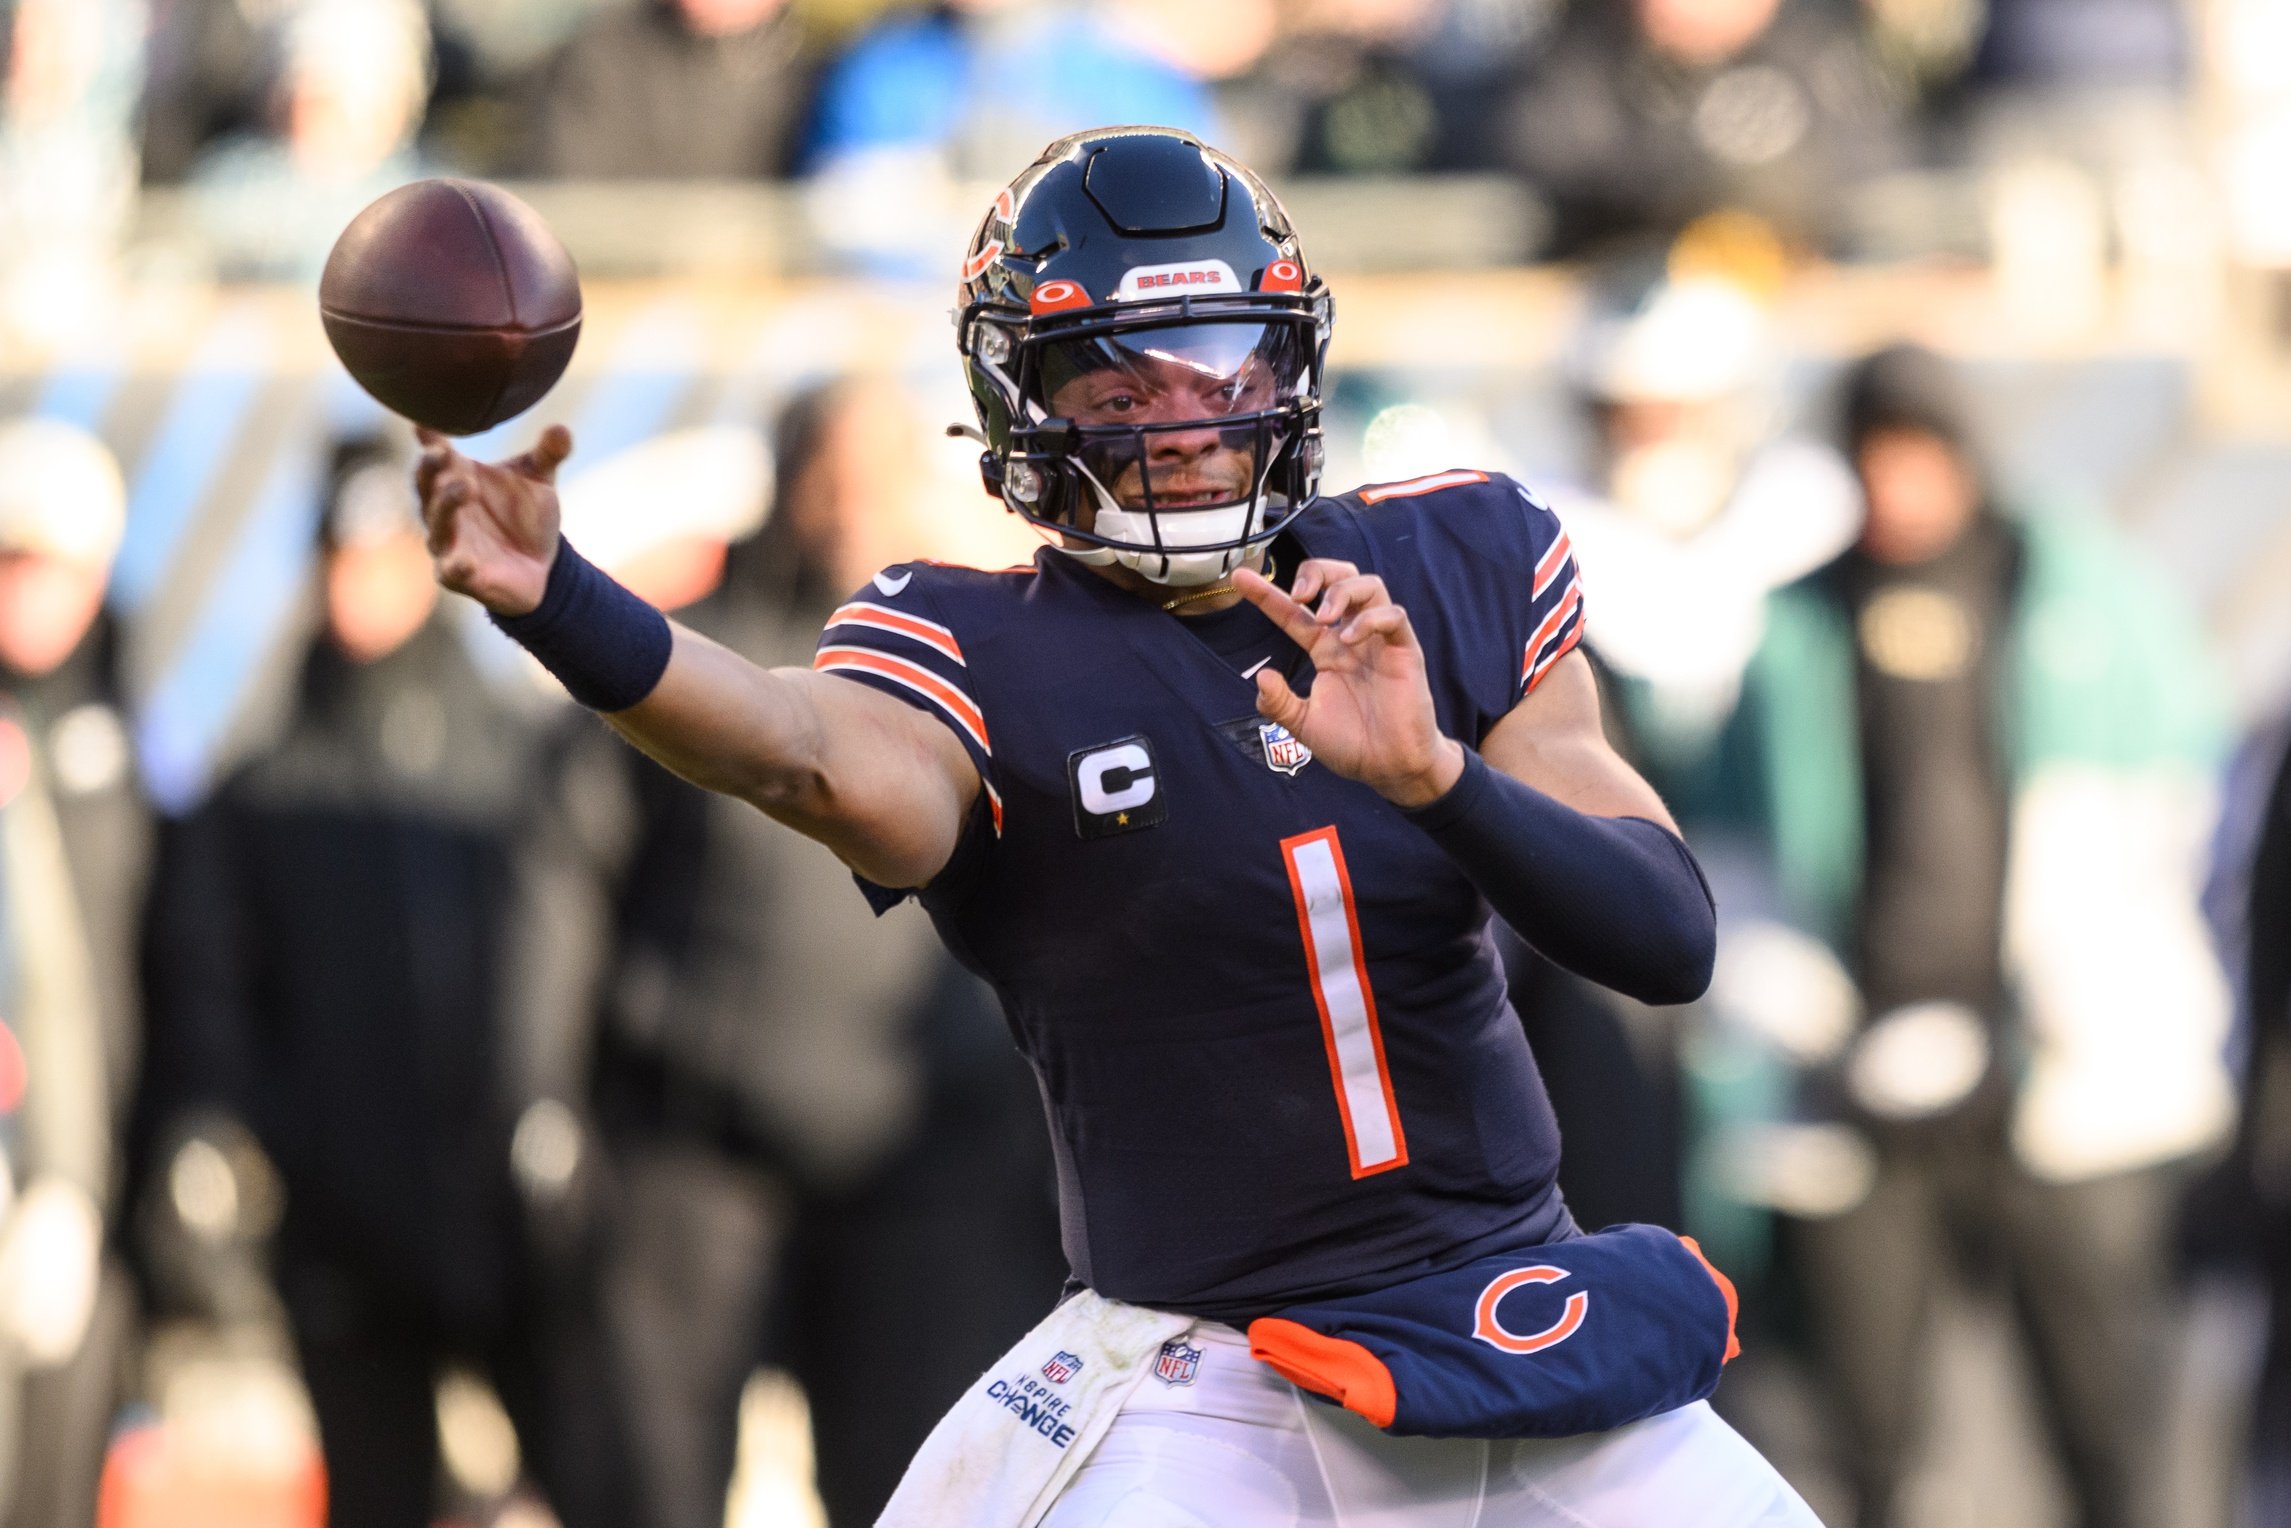 FANTASY FOOTBALL RANKINGS: the Expert Consensus on the Top 20 QBs